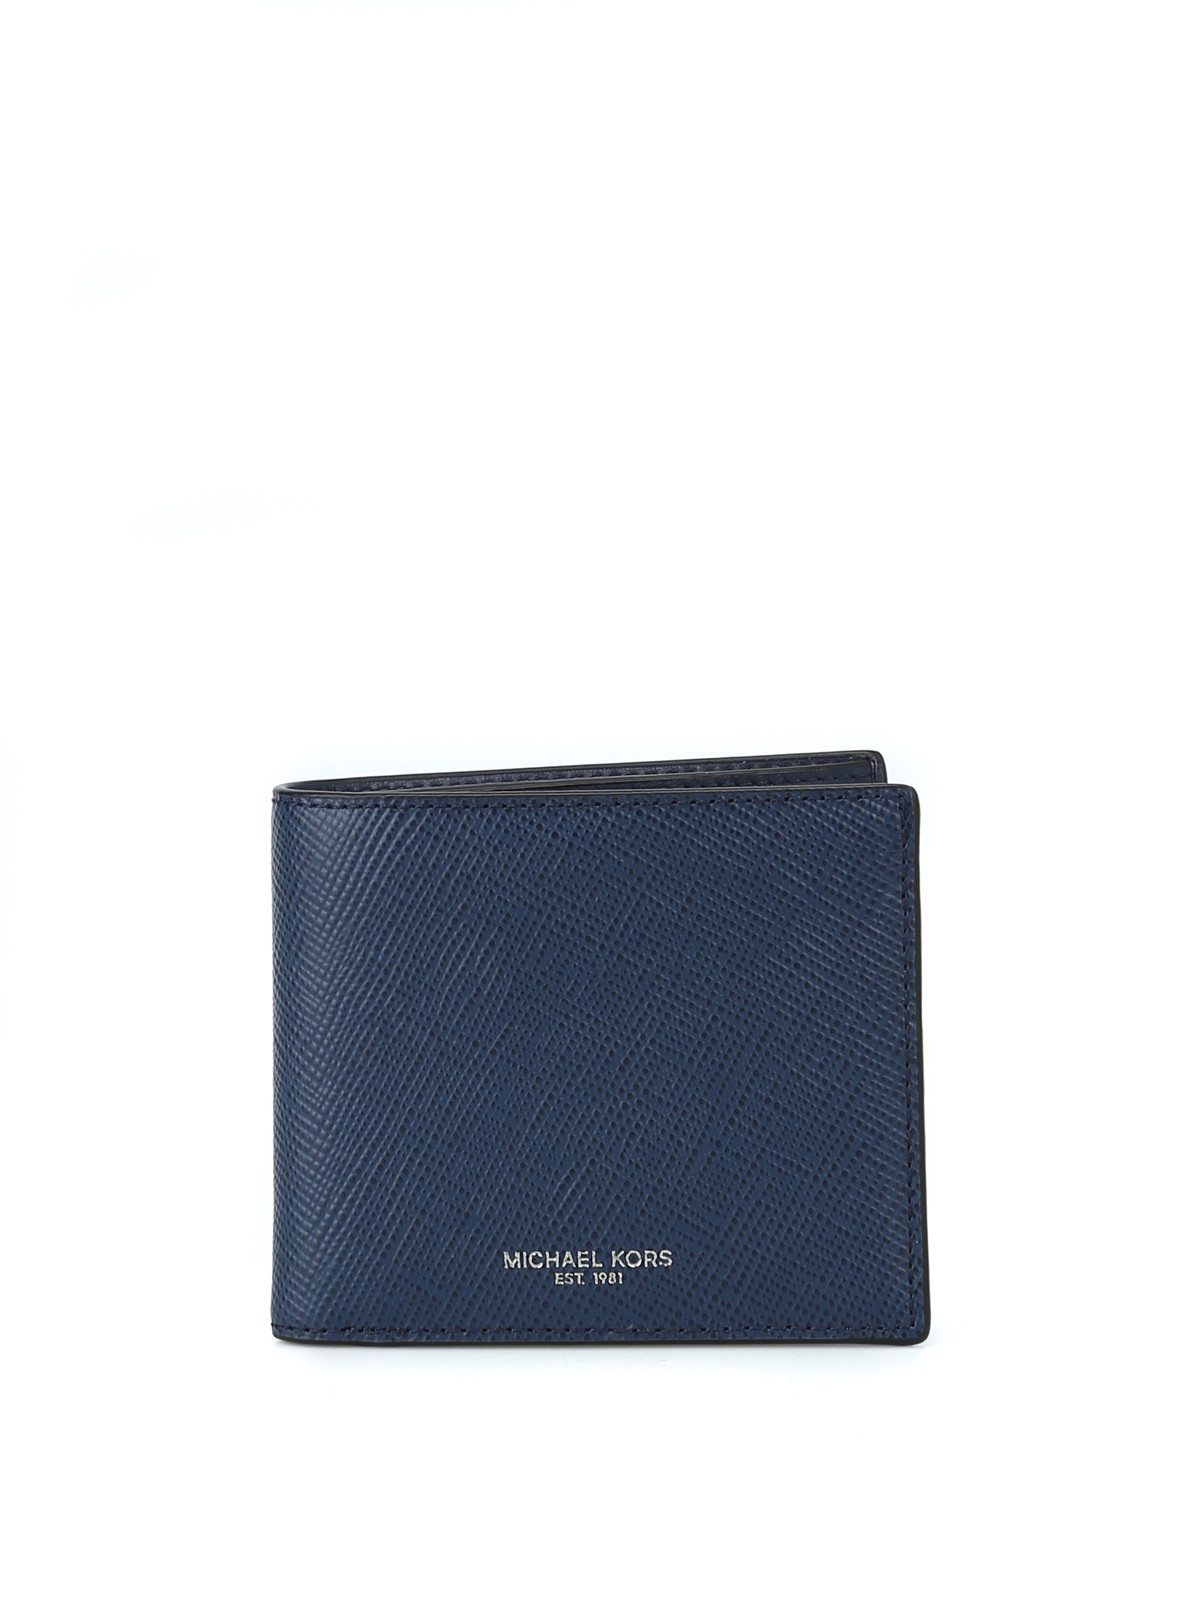 Leather wallet Michael Kors Navy in Leather  26133641